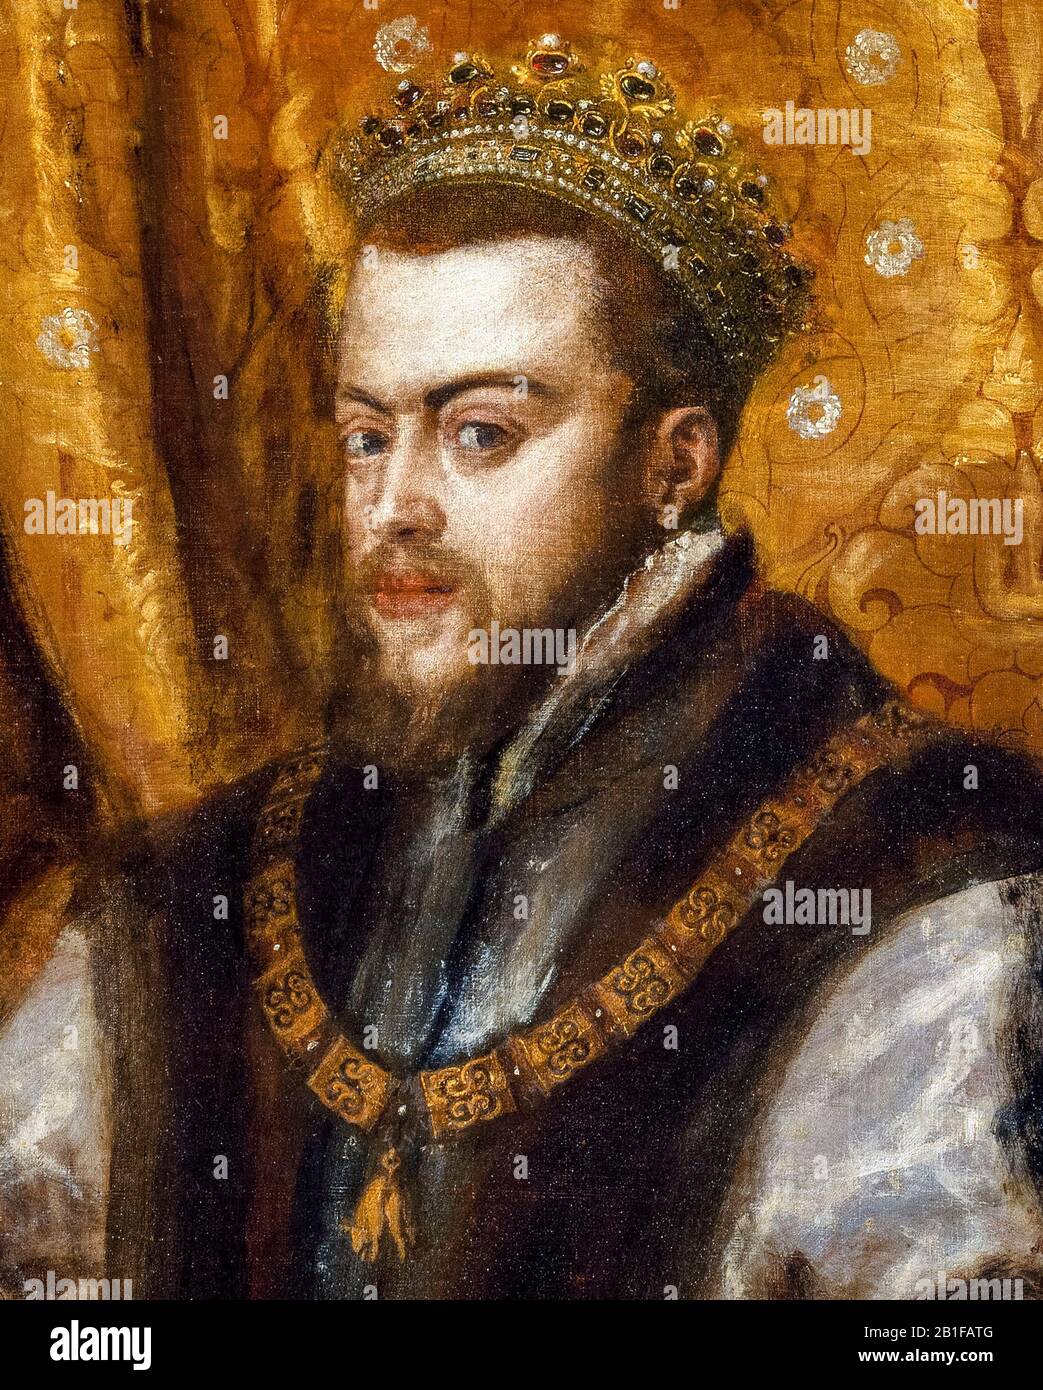 King Philip II of Spain (1527-1598), portrait painting detail by Titian, Tiziano Vecellio, 1545-1556 Stock Photo